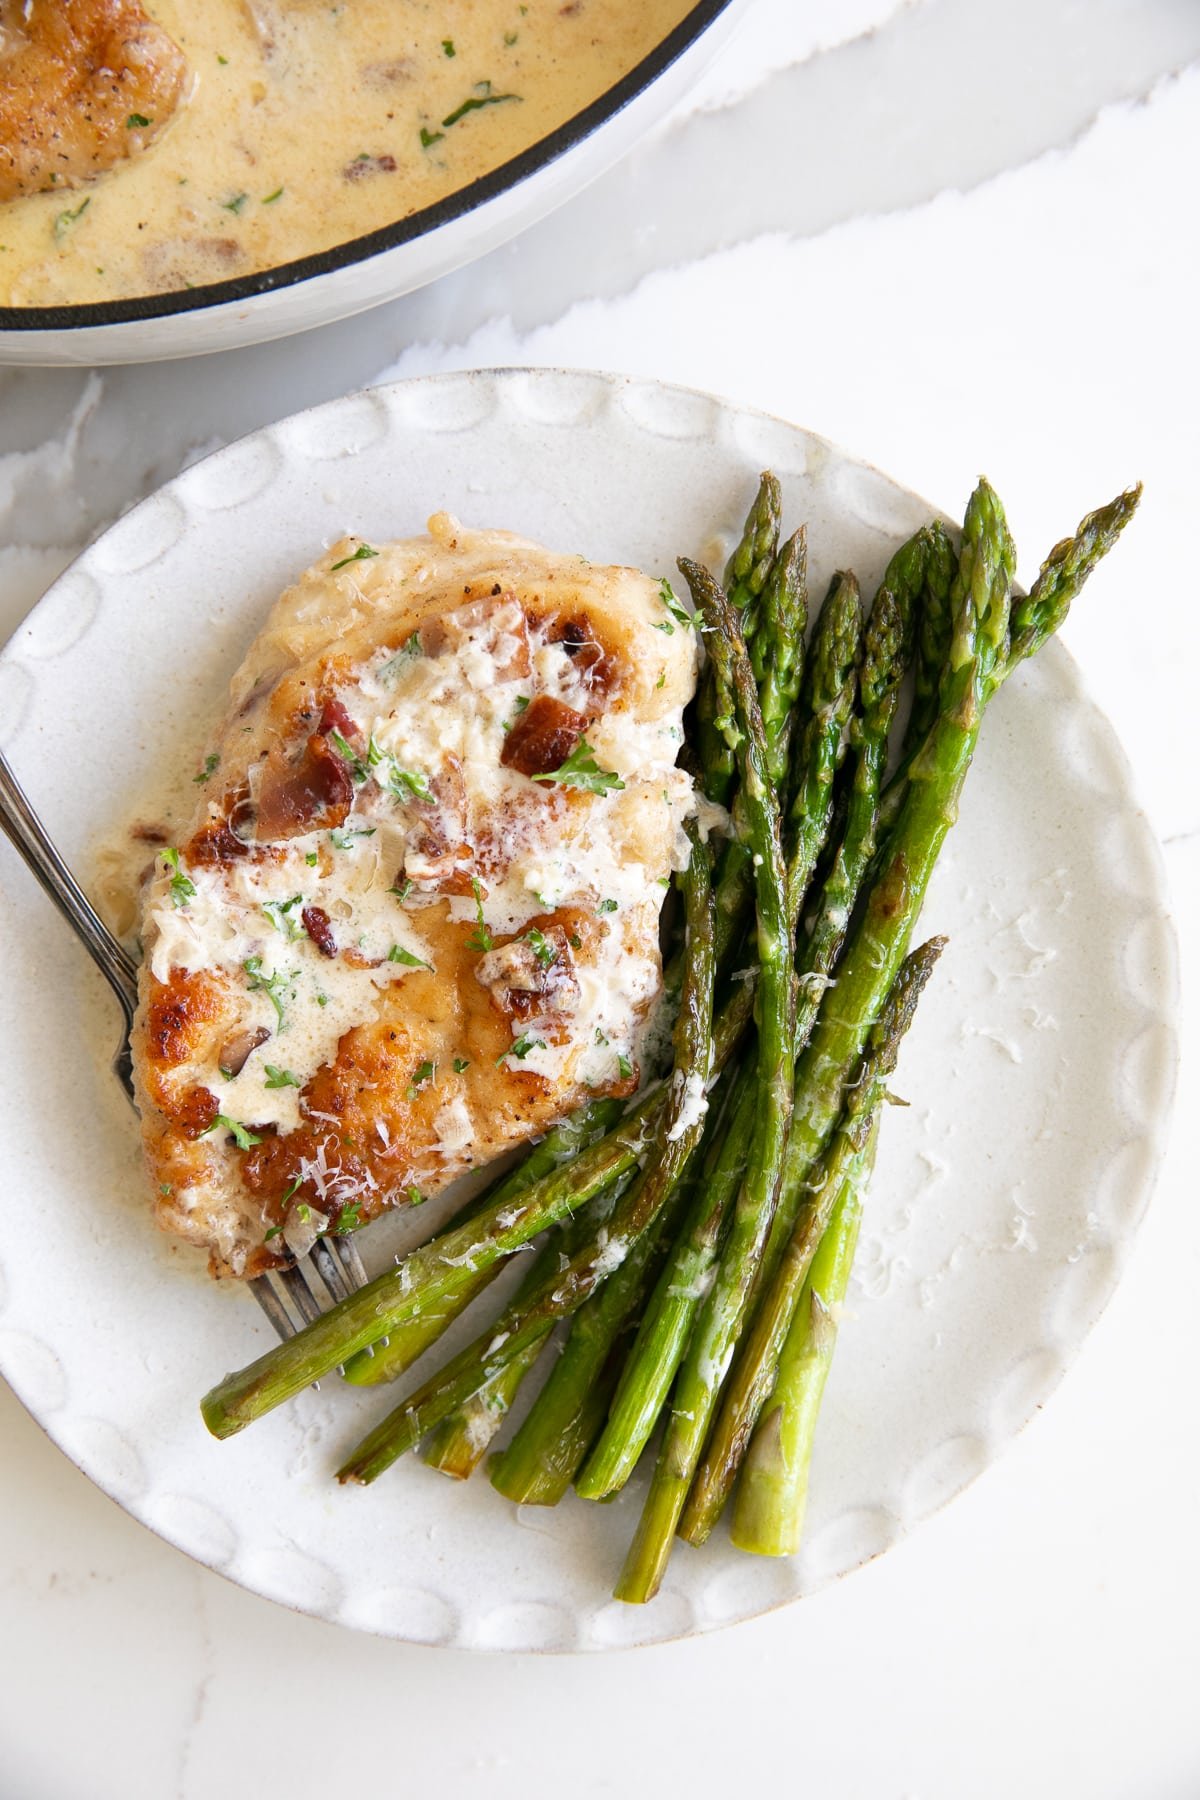 Overhead image of a white plate filled with chicken breast and asparagus drizzled with creamy bacon sauce.